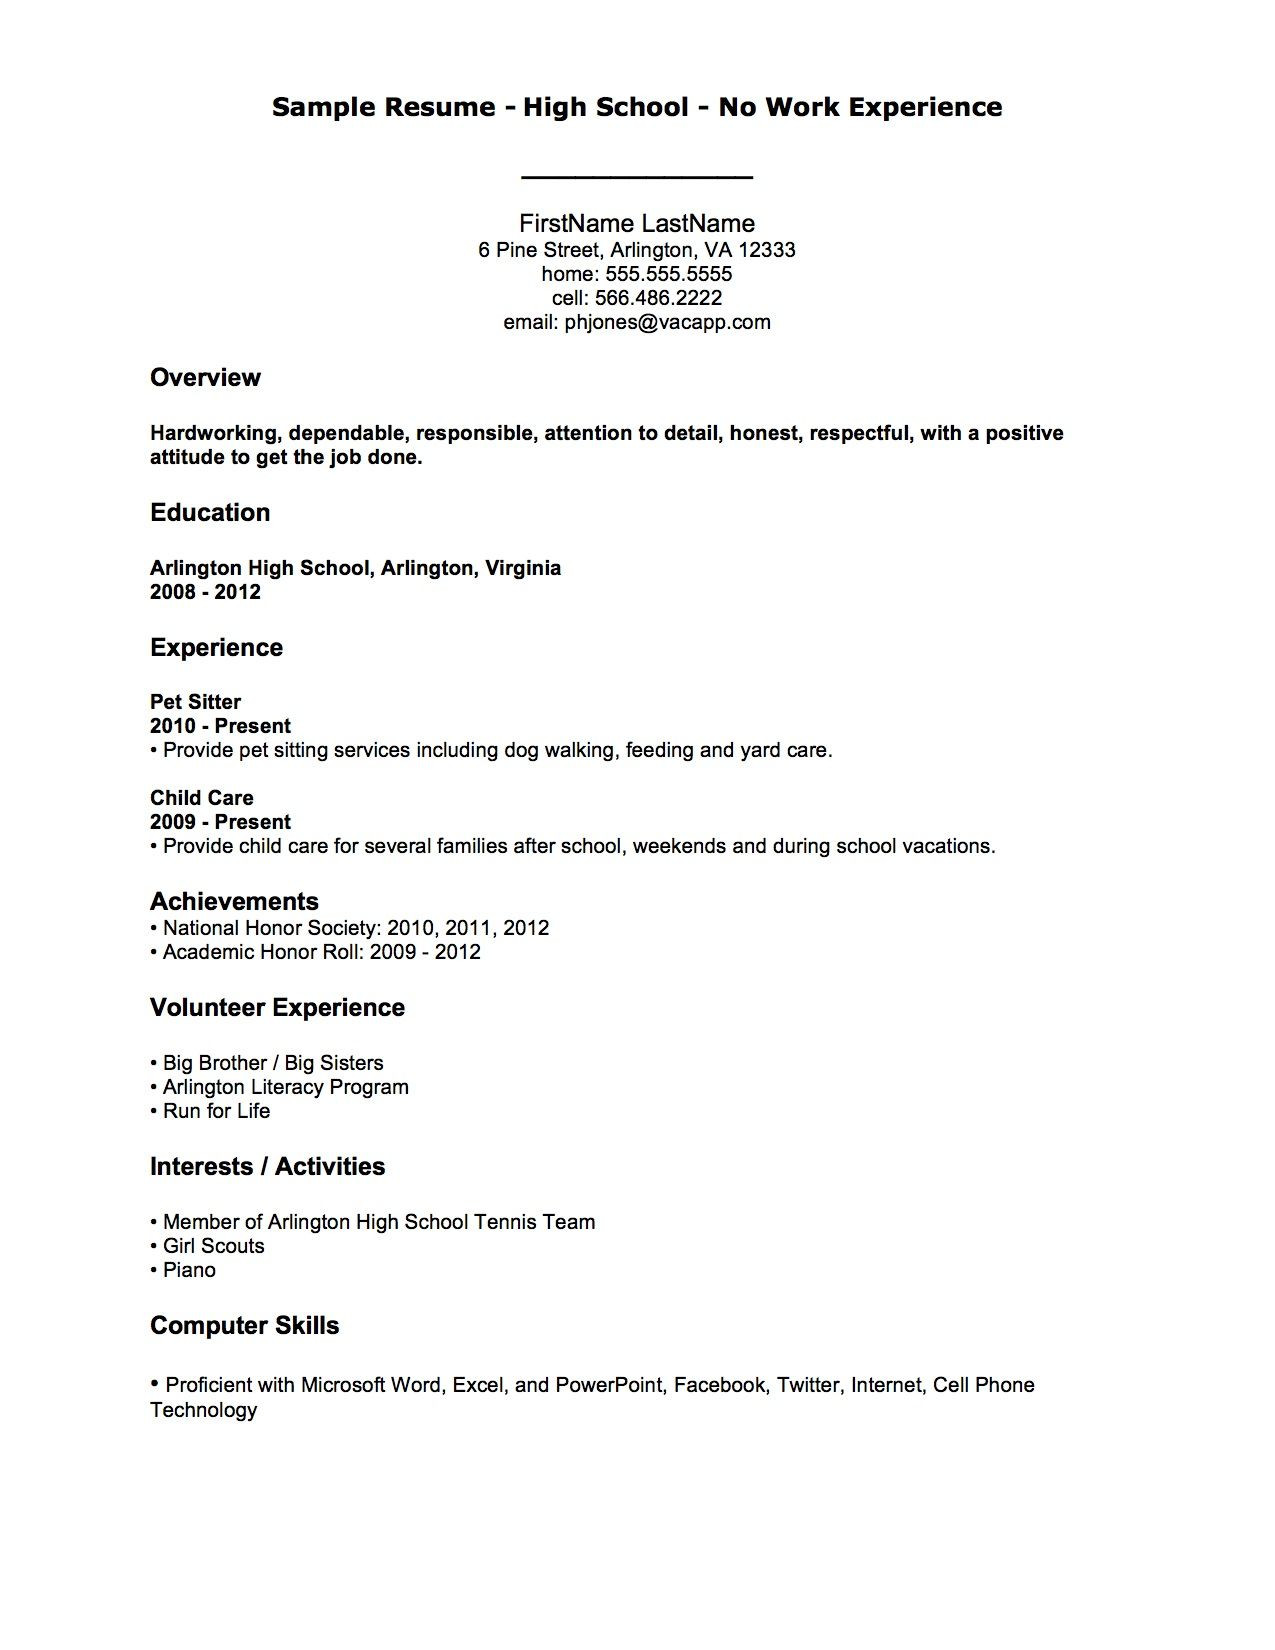 Resume for Student with No Work Experience Samples Resume Examples with No Job Experience , #examples #experience …